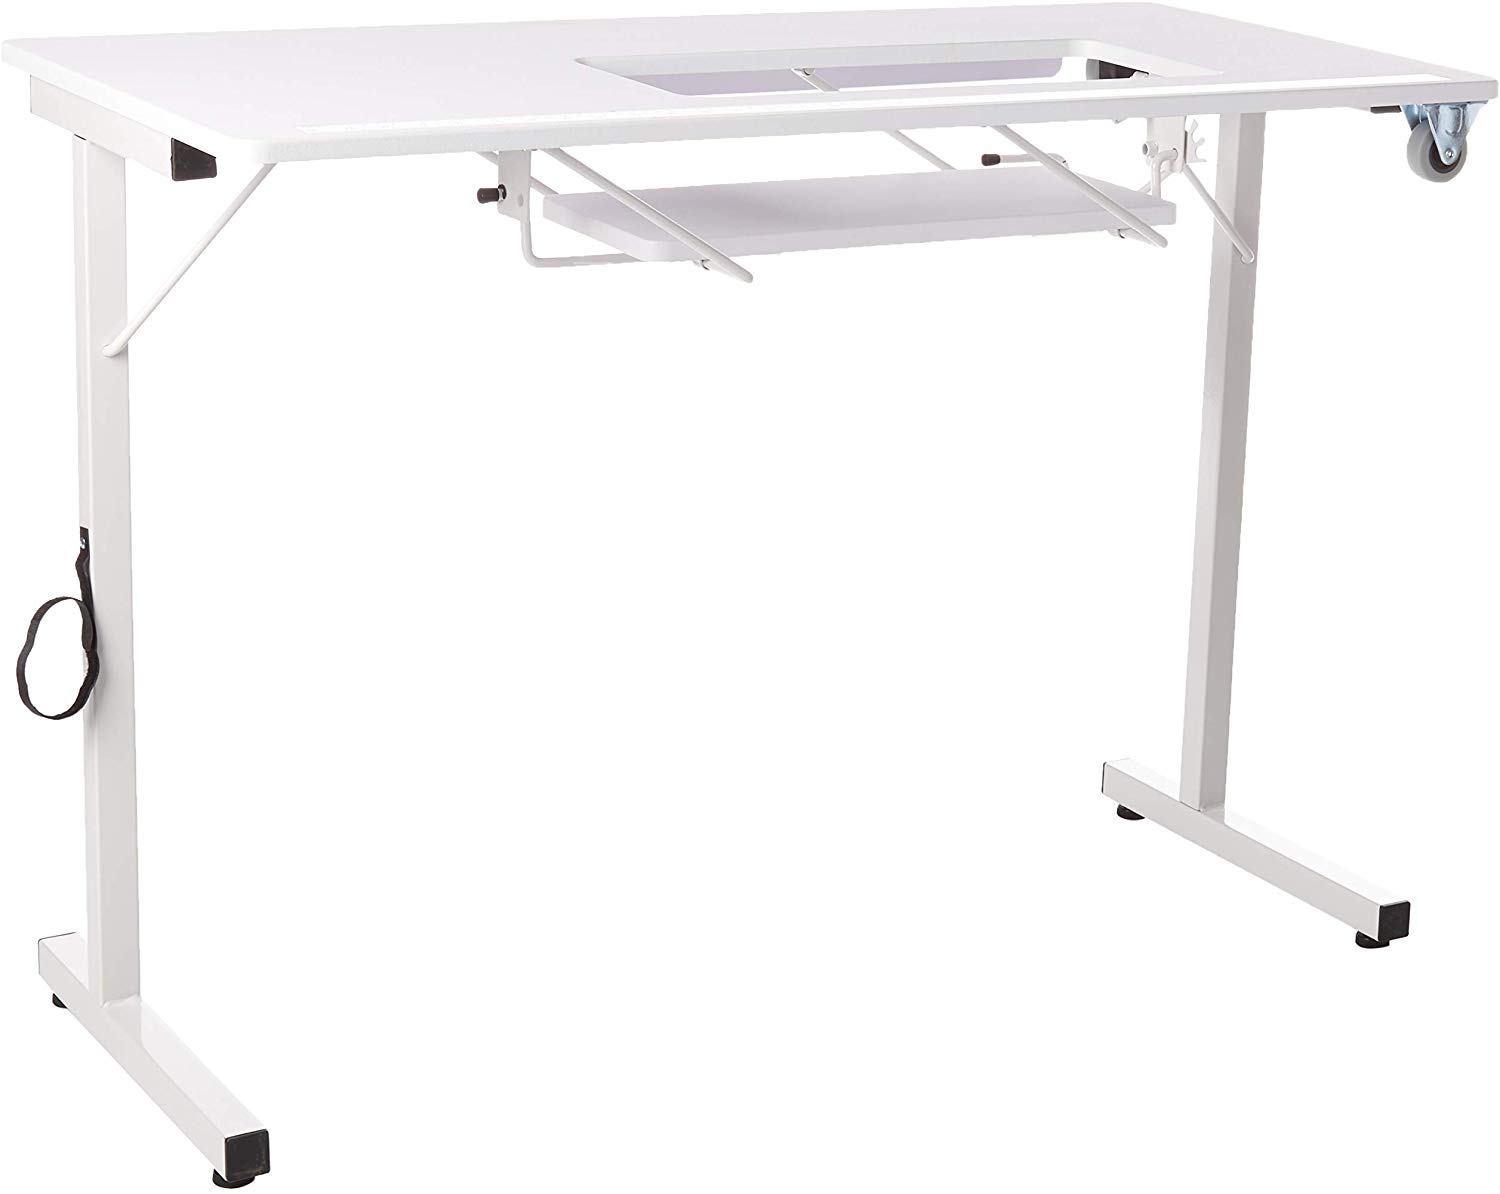 Sewing Rite SewStation 101 Cutting Table